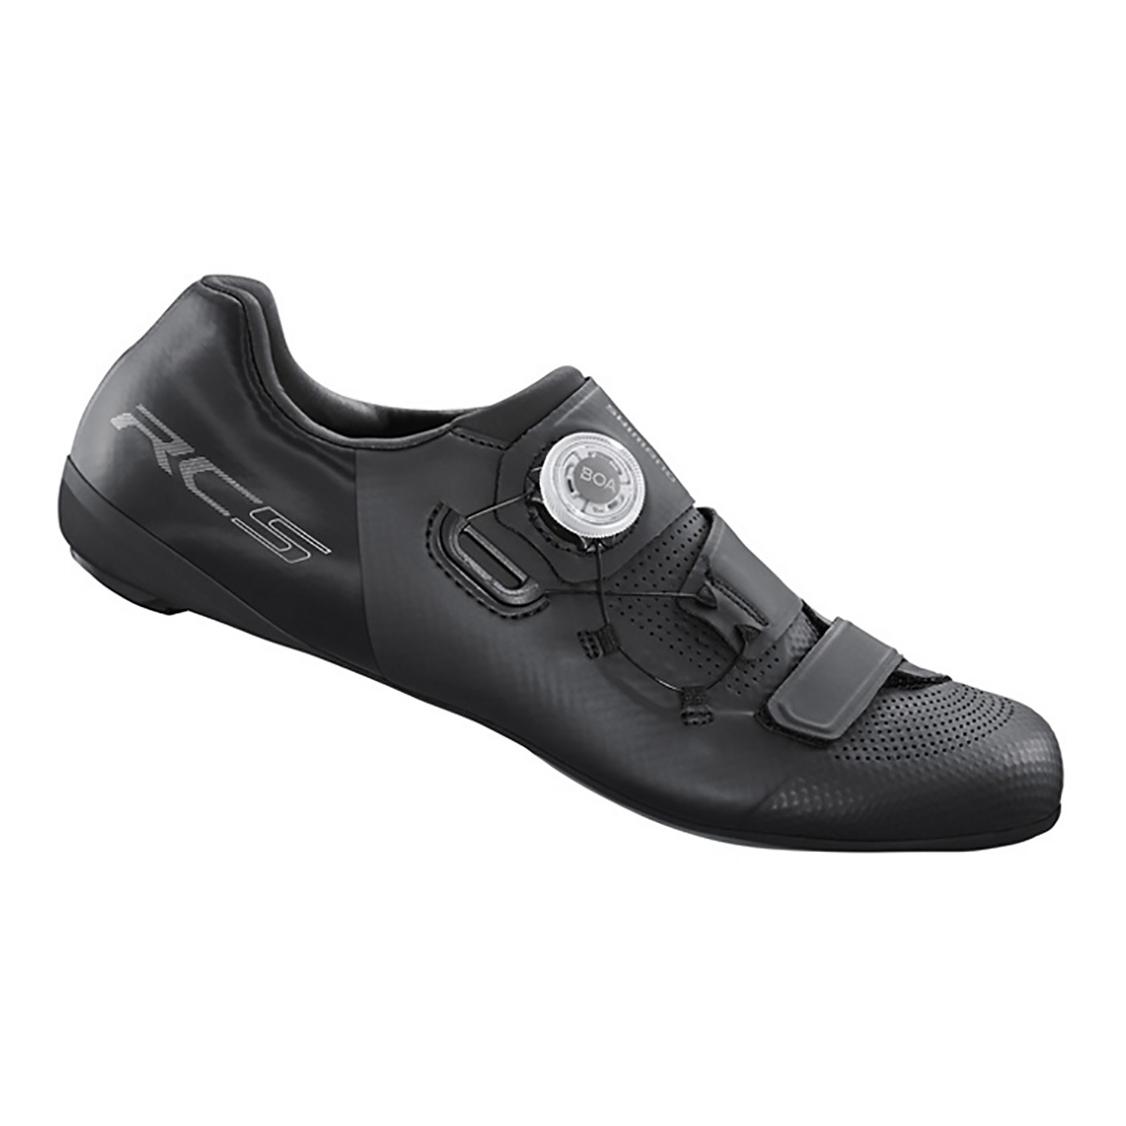 Shimano Chaussures route RC502 Noir 46 